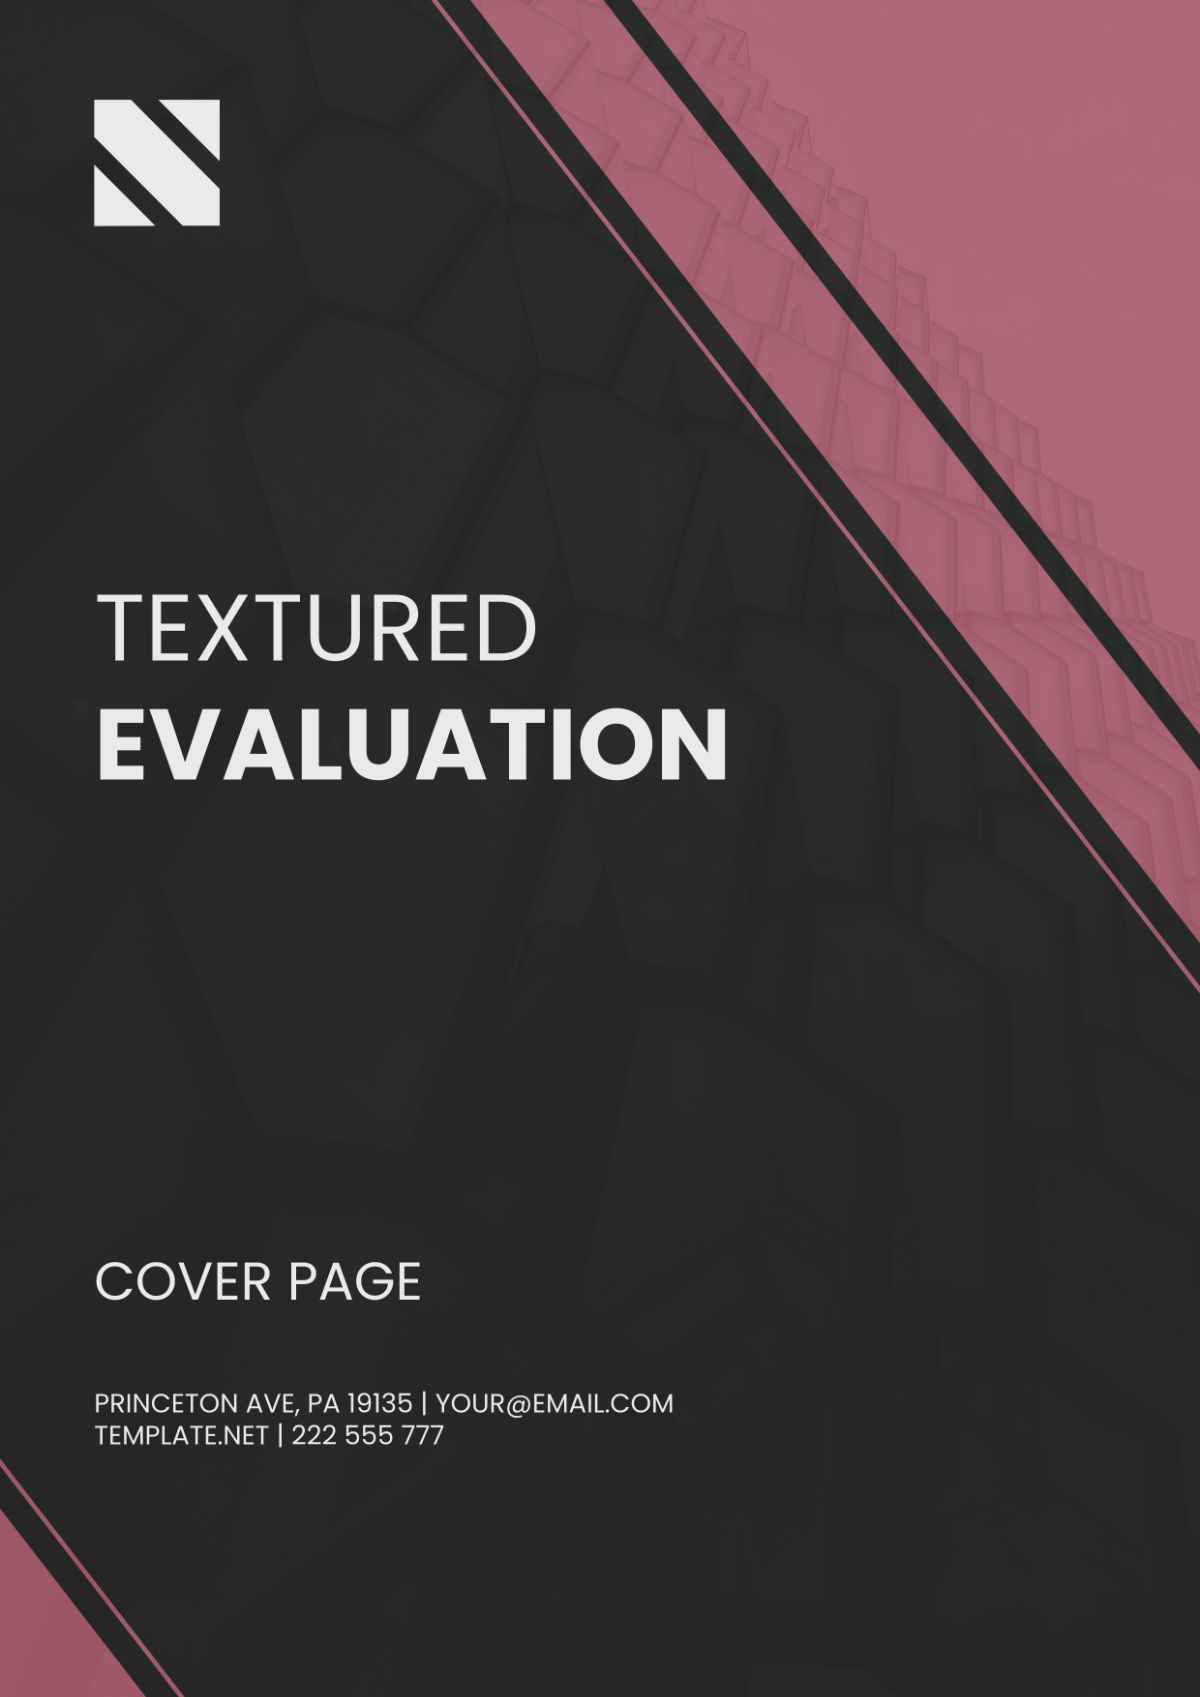 Textured Evaluation Cover Page